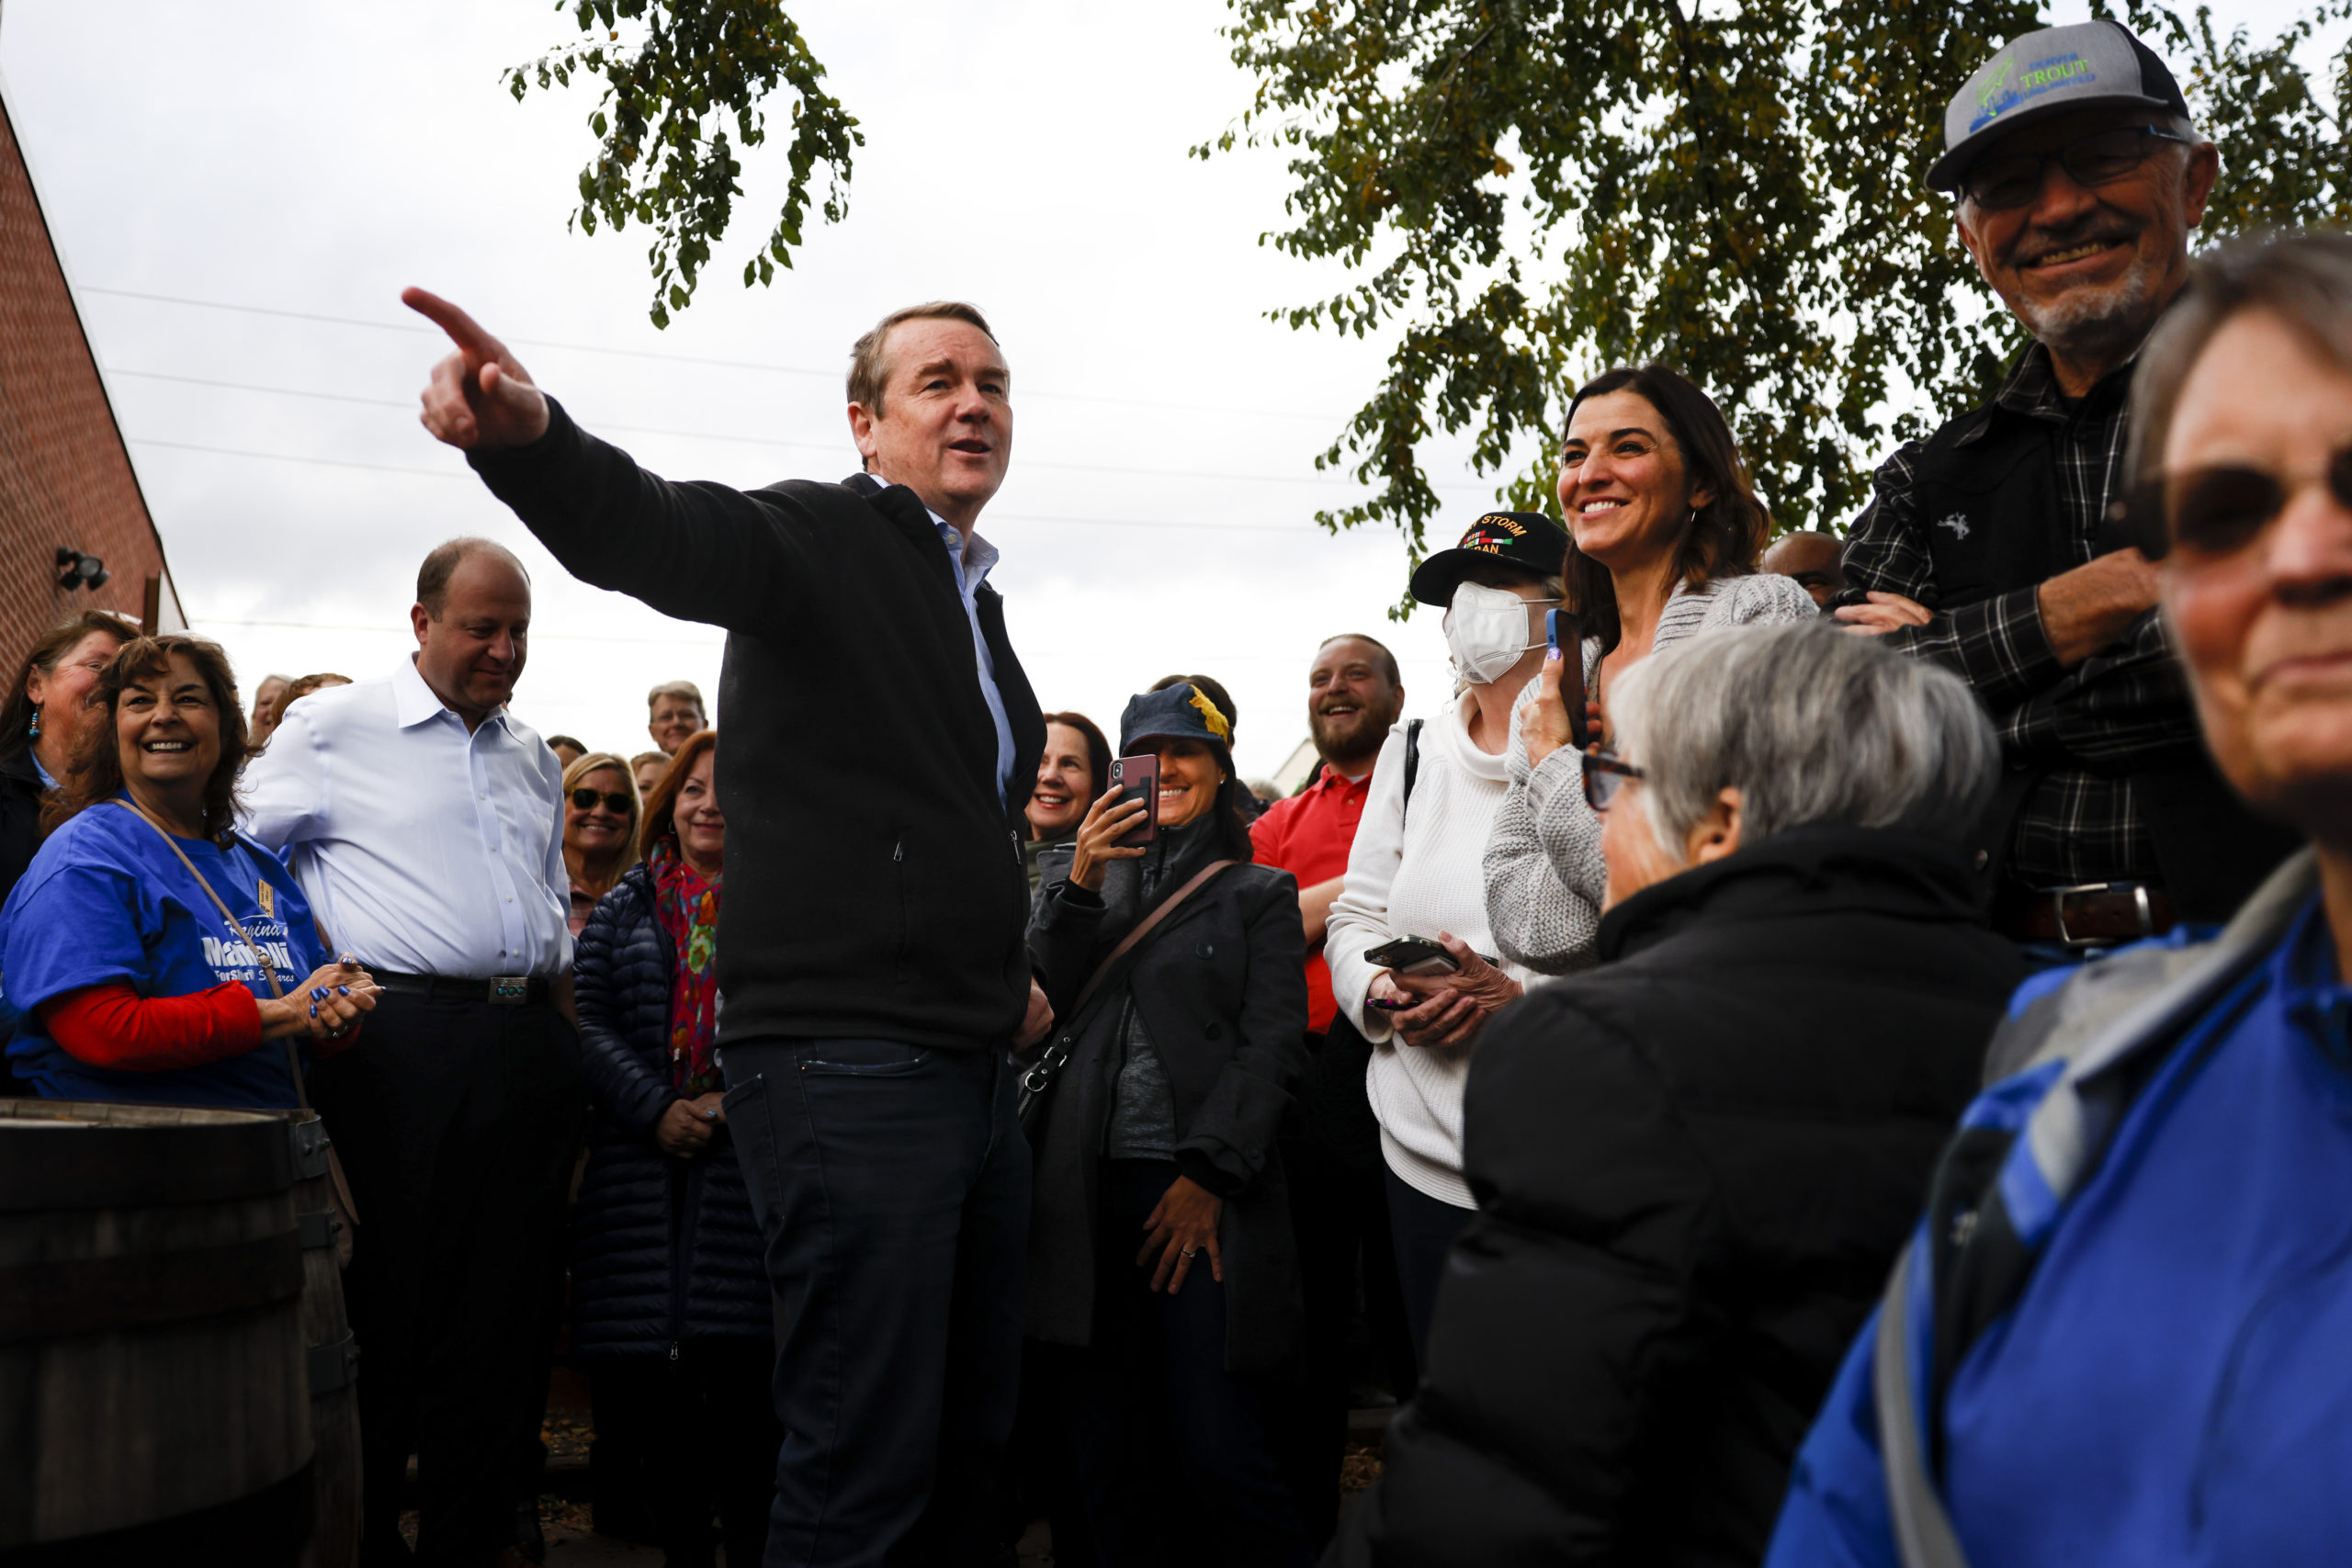 GOLDEN, CO - OCTOBER 26: Sen. Michael Bennet (D-CO) speaks to supporters at a rally outside Mountain Toad Brewing on October 26, 2022 in Golden, Colorado. (Photo by Michael Ciaglo/Getty Images)